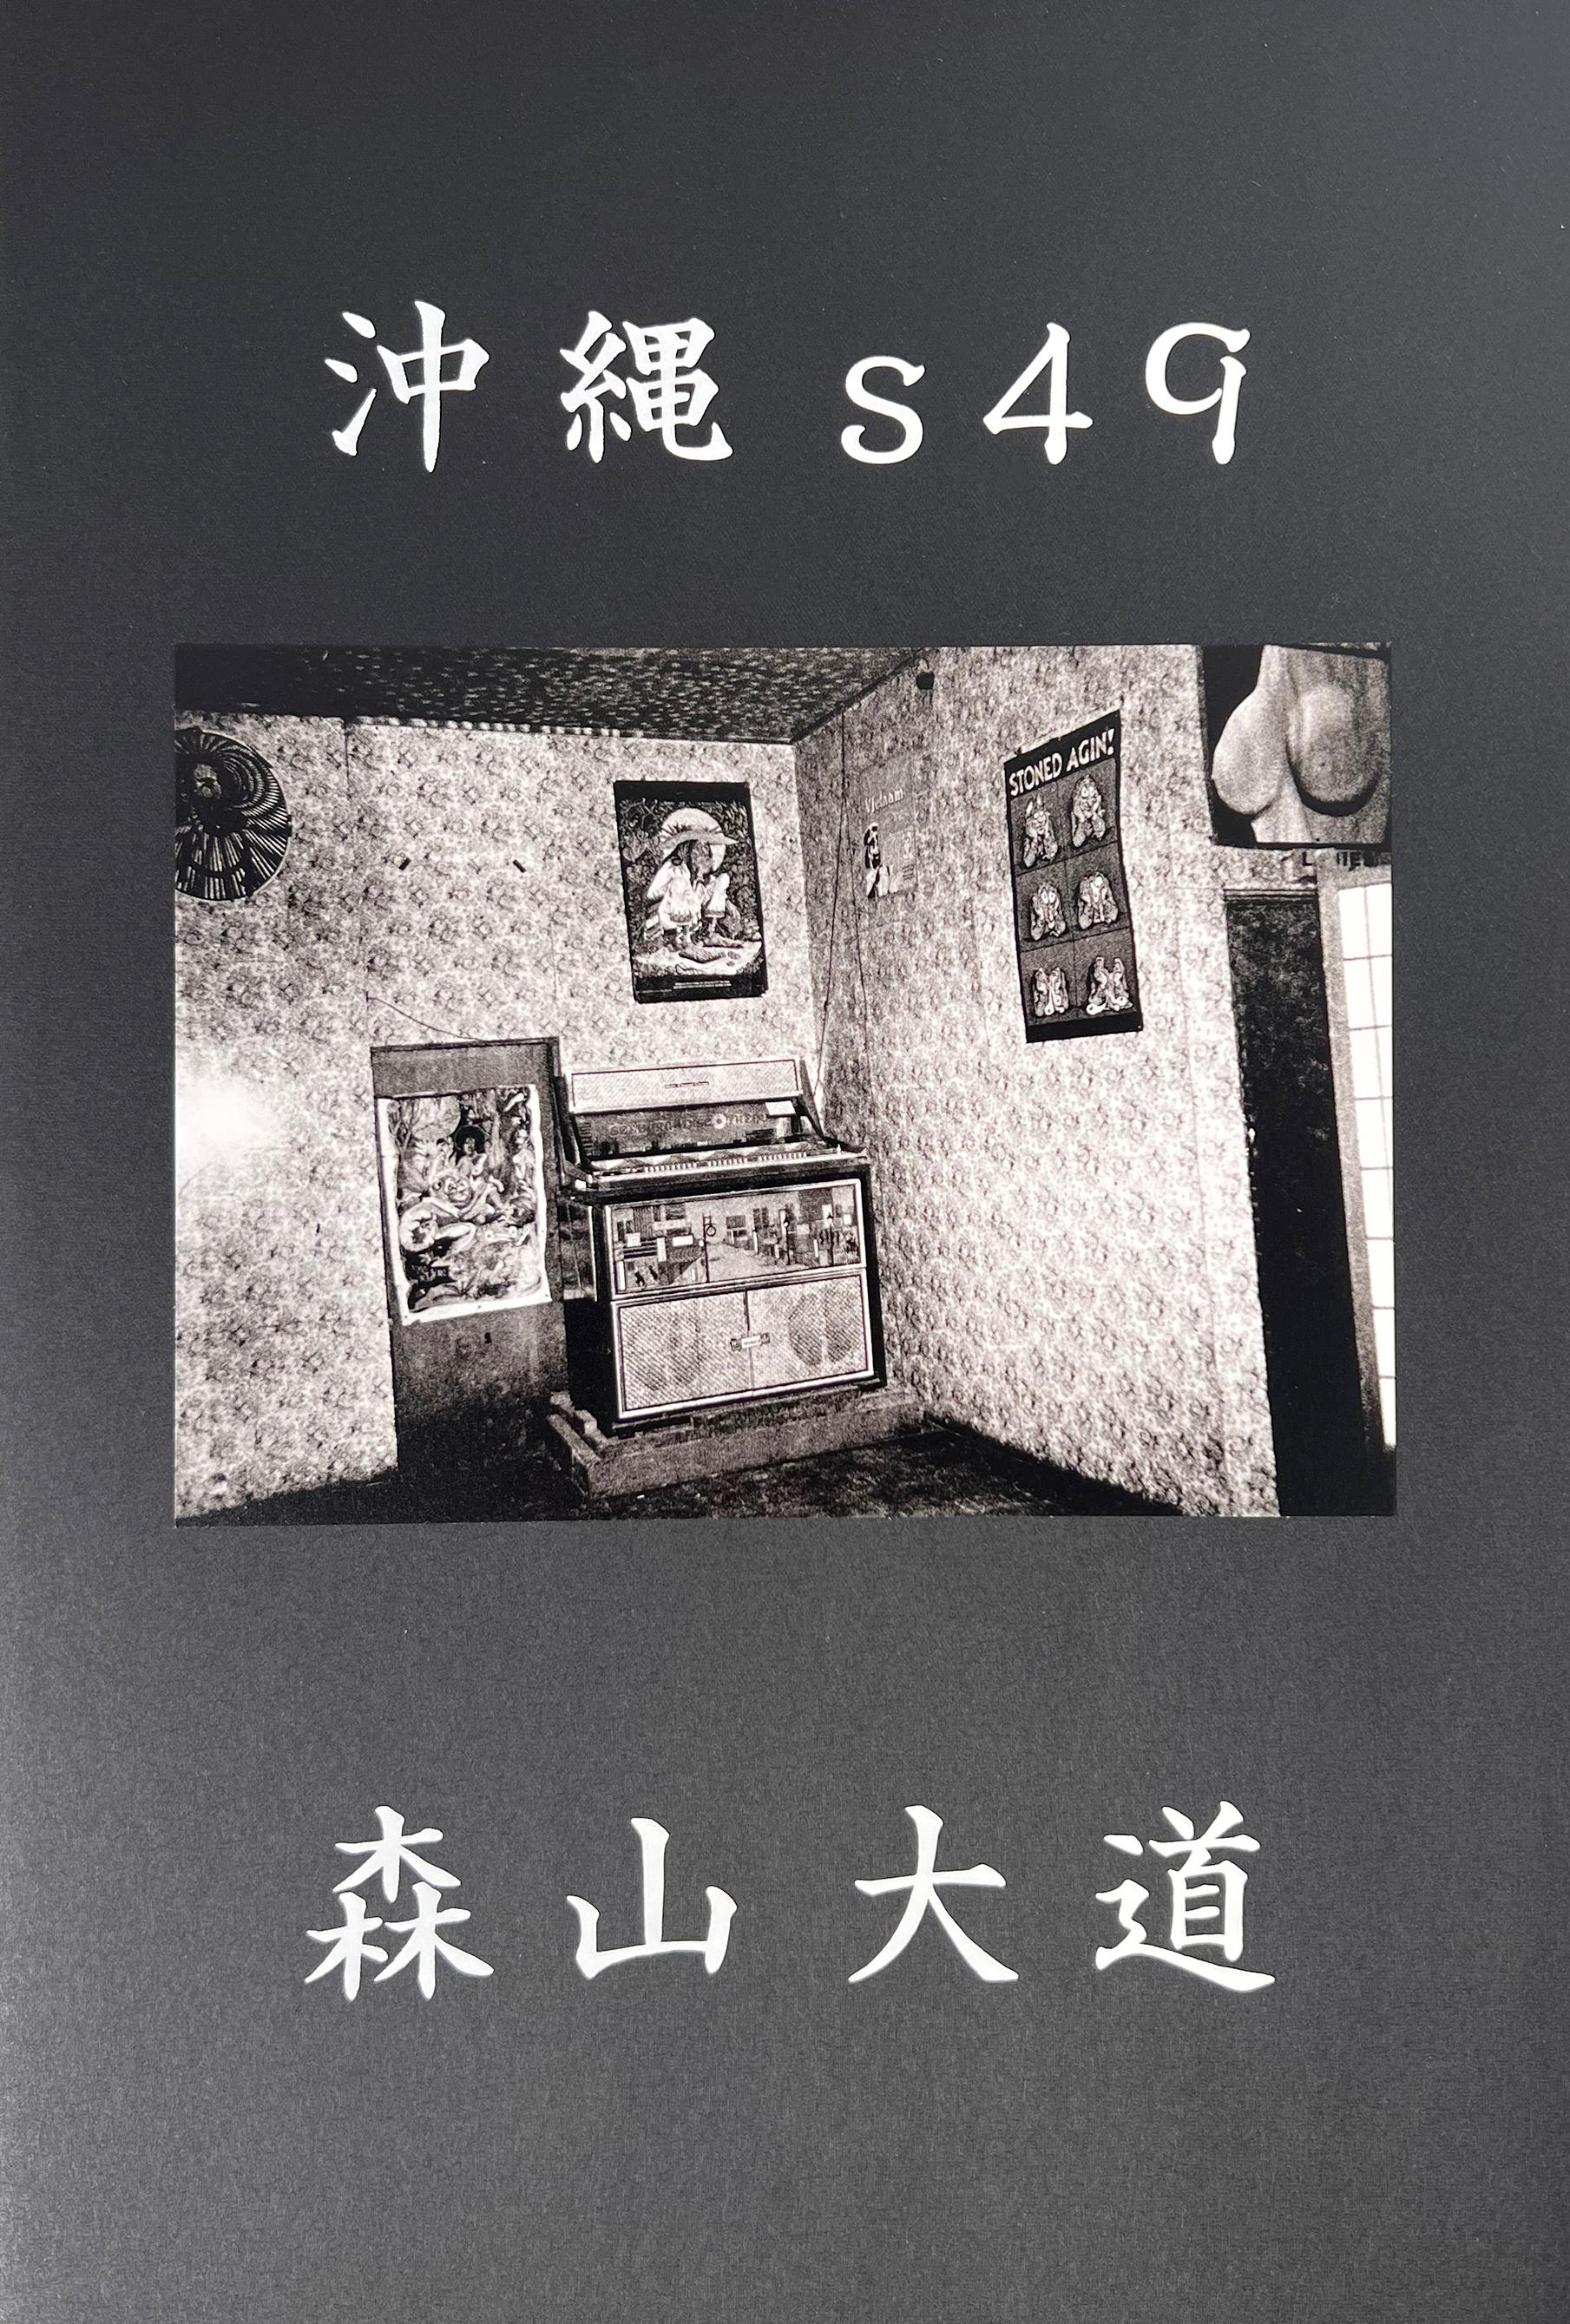 Signed Daido Moriyama artist book: Daido Moriyama Okinawa s49:

Softcover. 2020. Approximately 36 pages; with 17 black & white illustrations. Dimensions: 9.5 x 14.25 inches.

Hand signed by Moriyama on the interior first page.
From a Limited edition